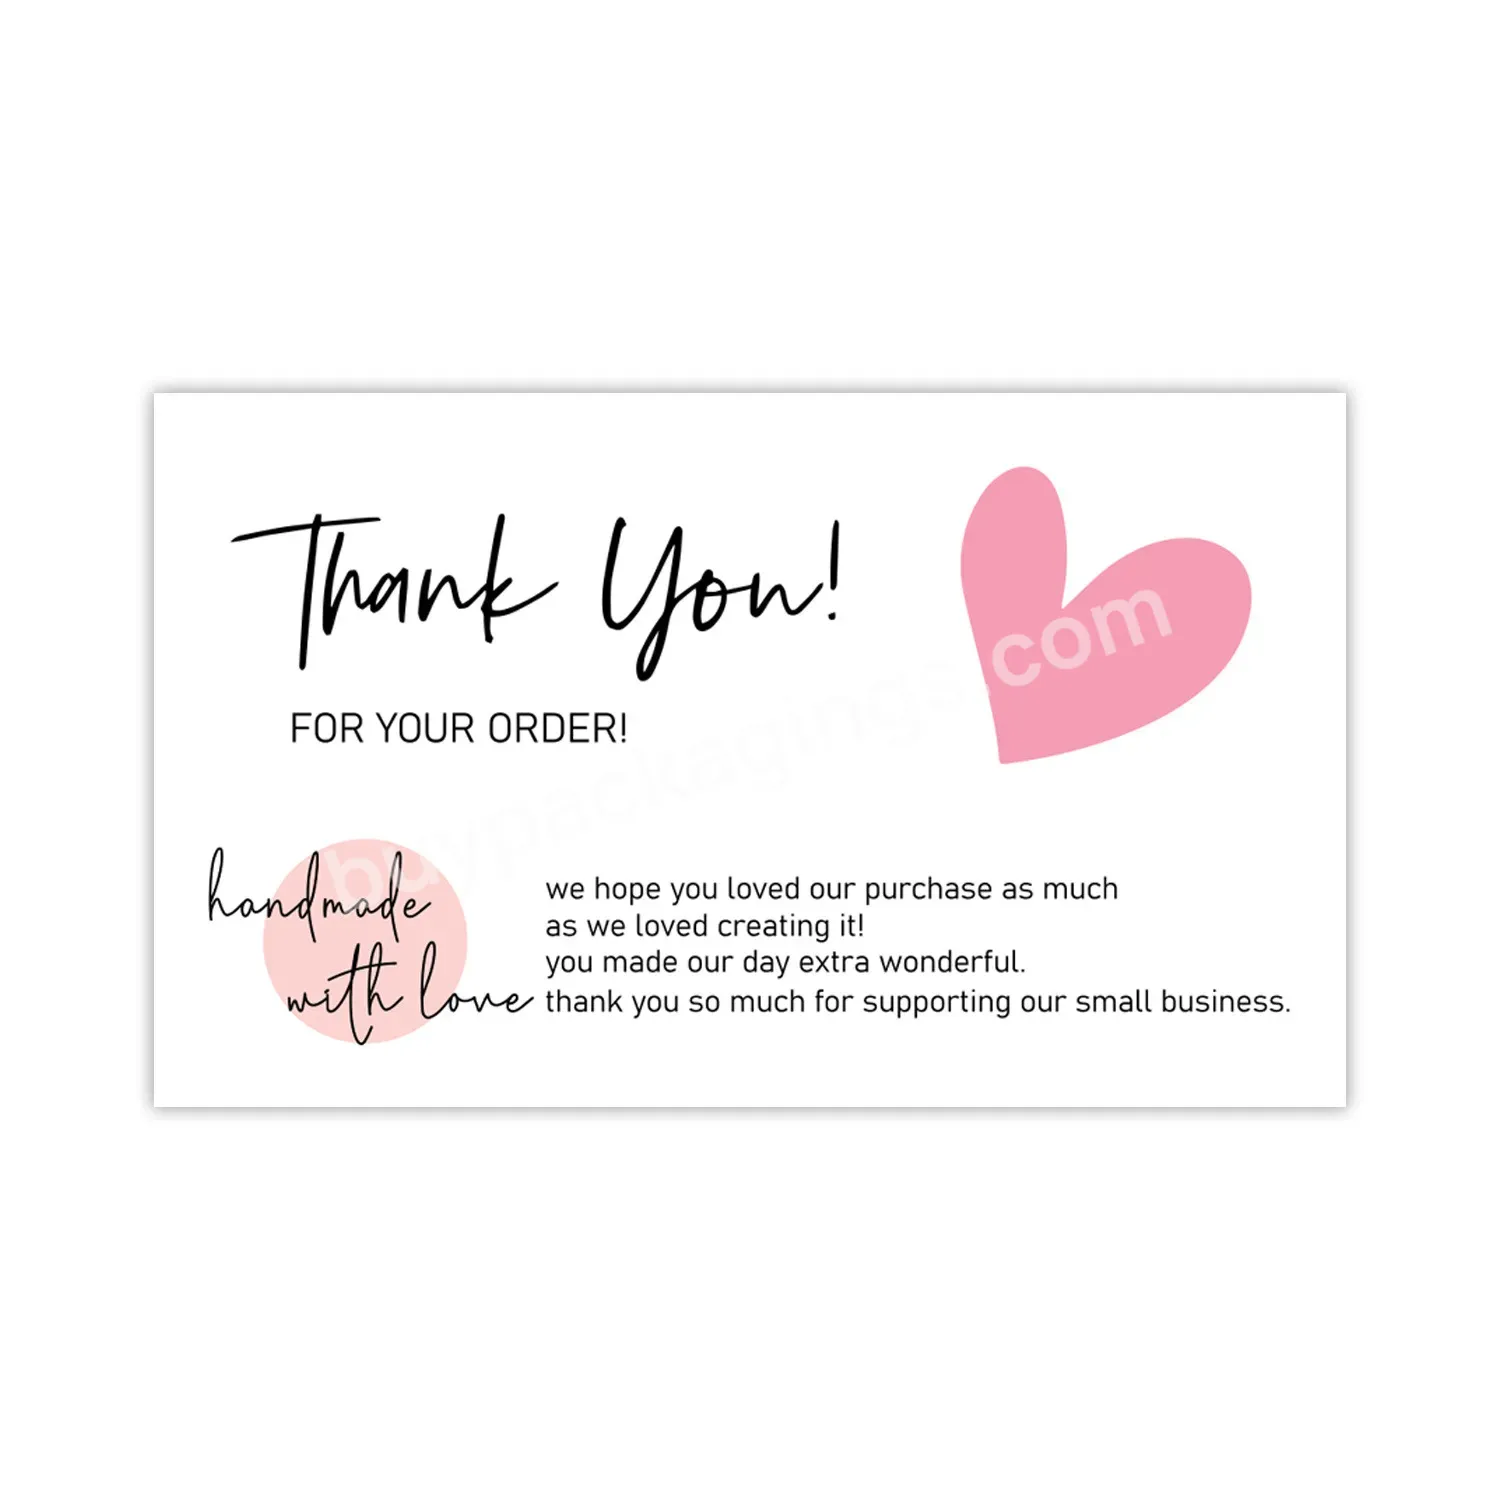 Custom Logo High Quality Birthday Cards Brochure Thank You Cards For Small Business - Buy Thank You Cards For Small Business,High Quality Birthday Cards,Custom Logo Thank You Cards.